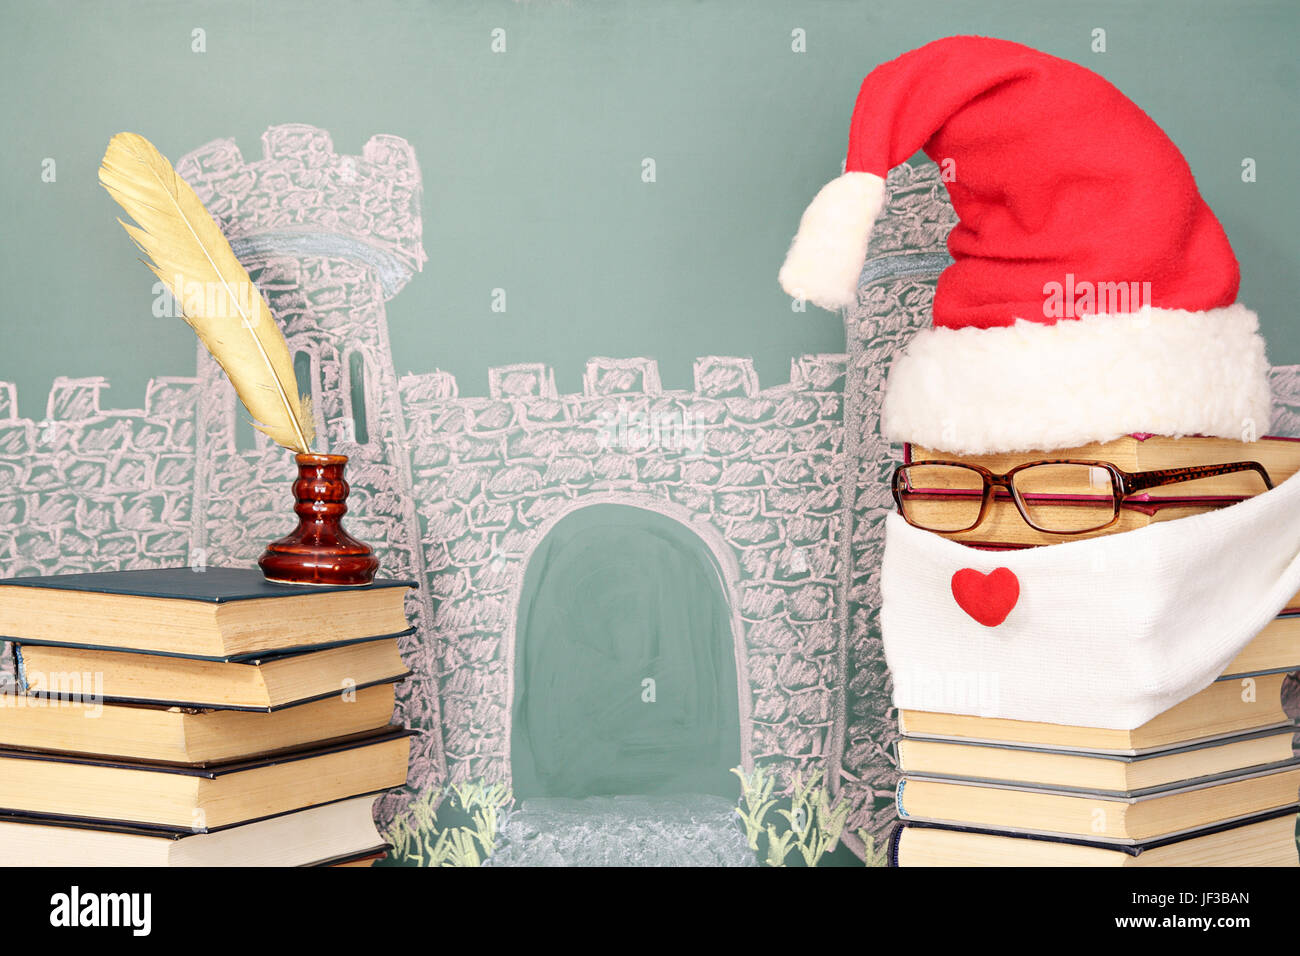 Unusual Santa Claus from books before blackboard with drawing chalk of castle Stock Photo